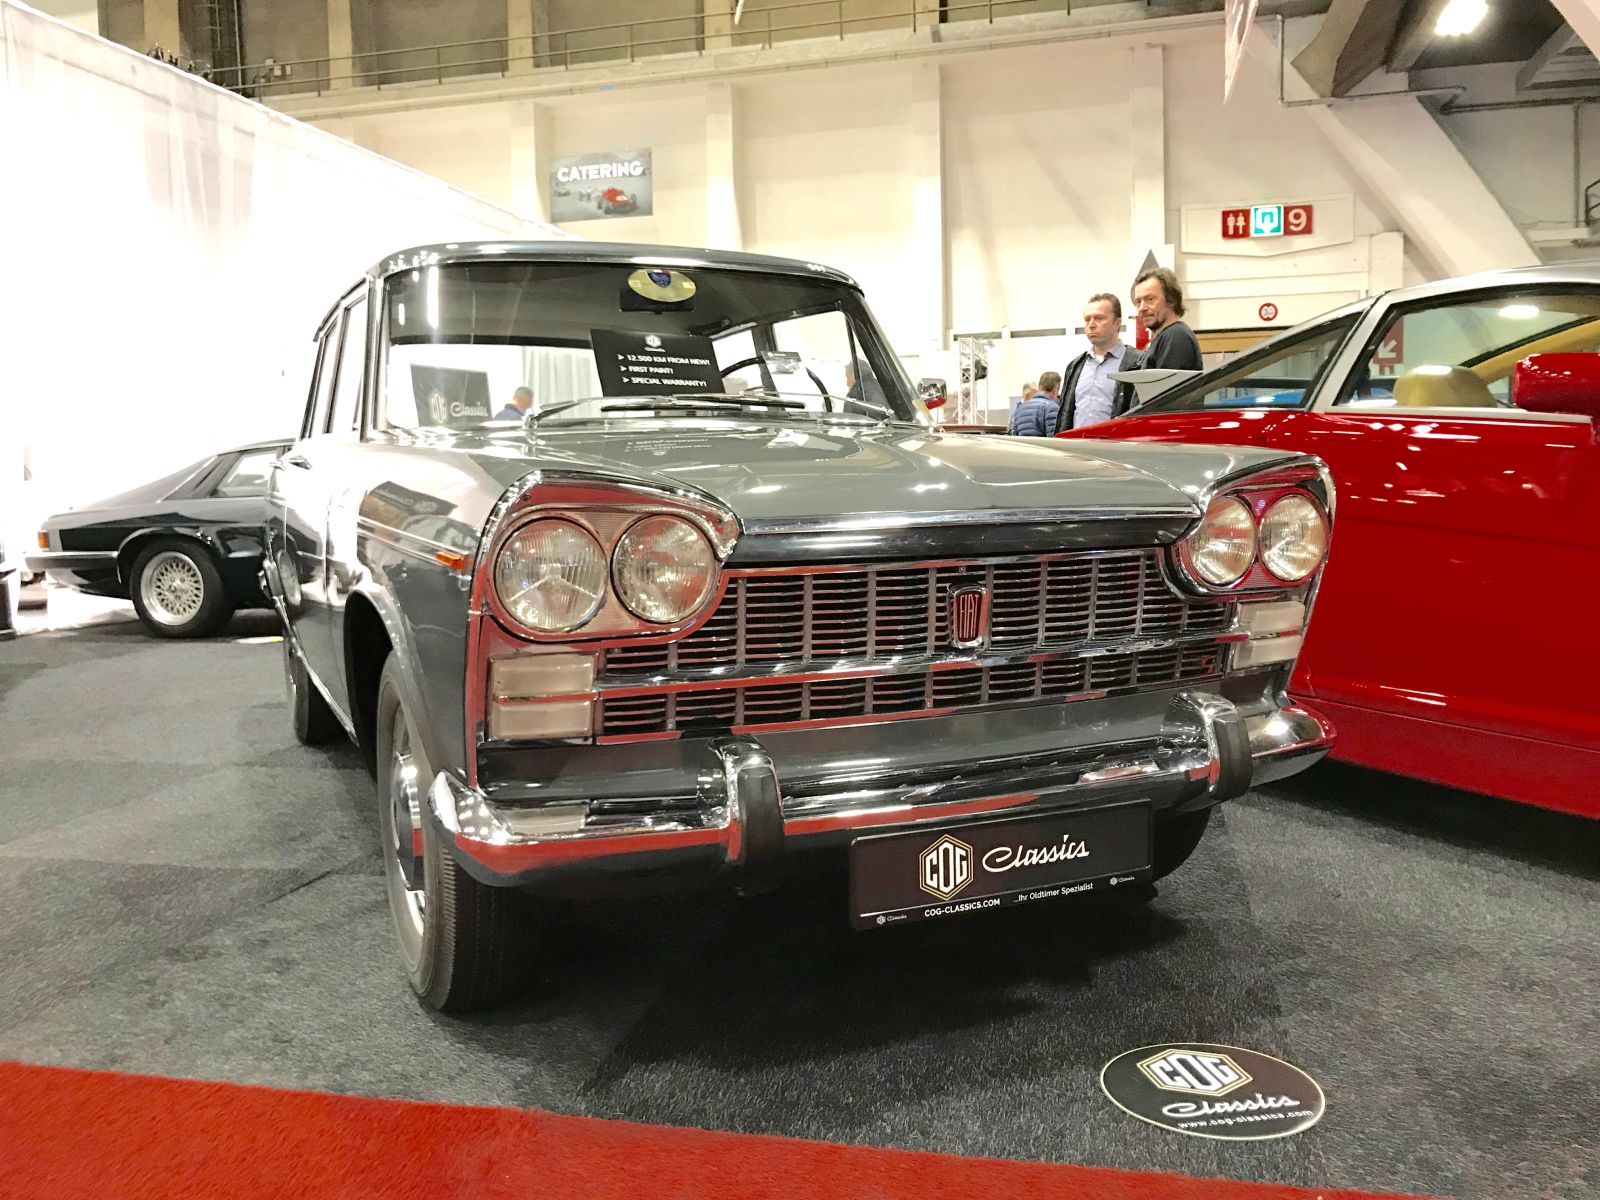 Fiat 2300 Berlina. I don’t know what pissed it off.